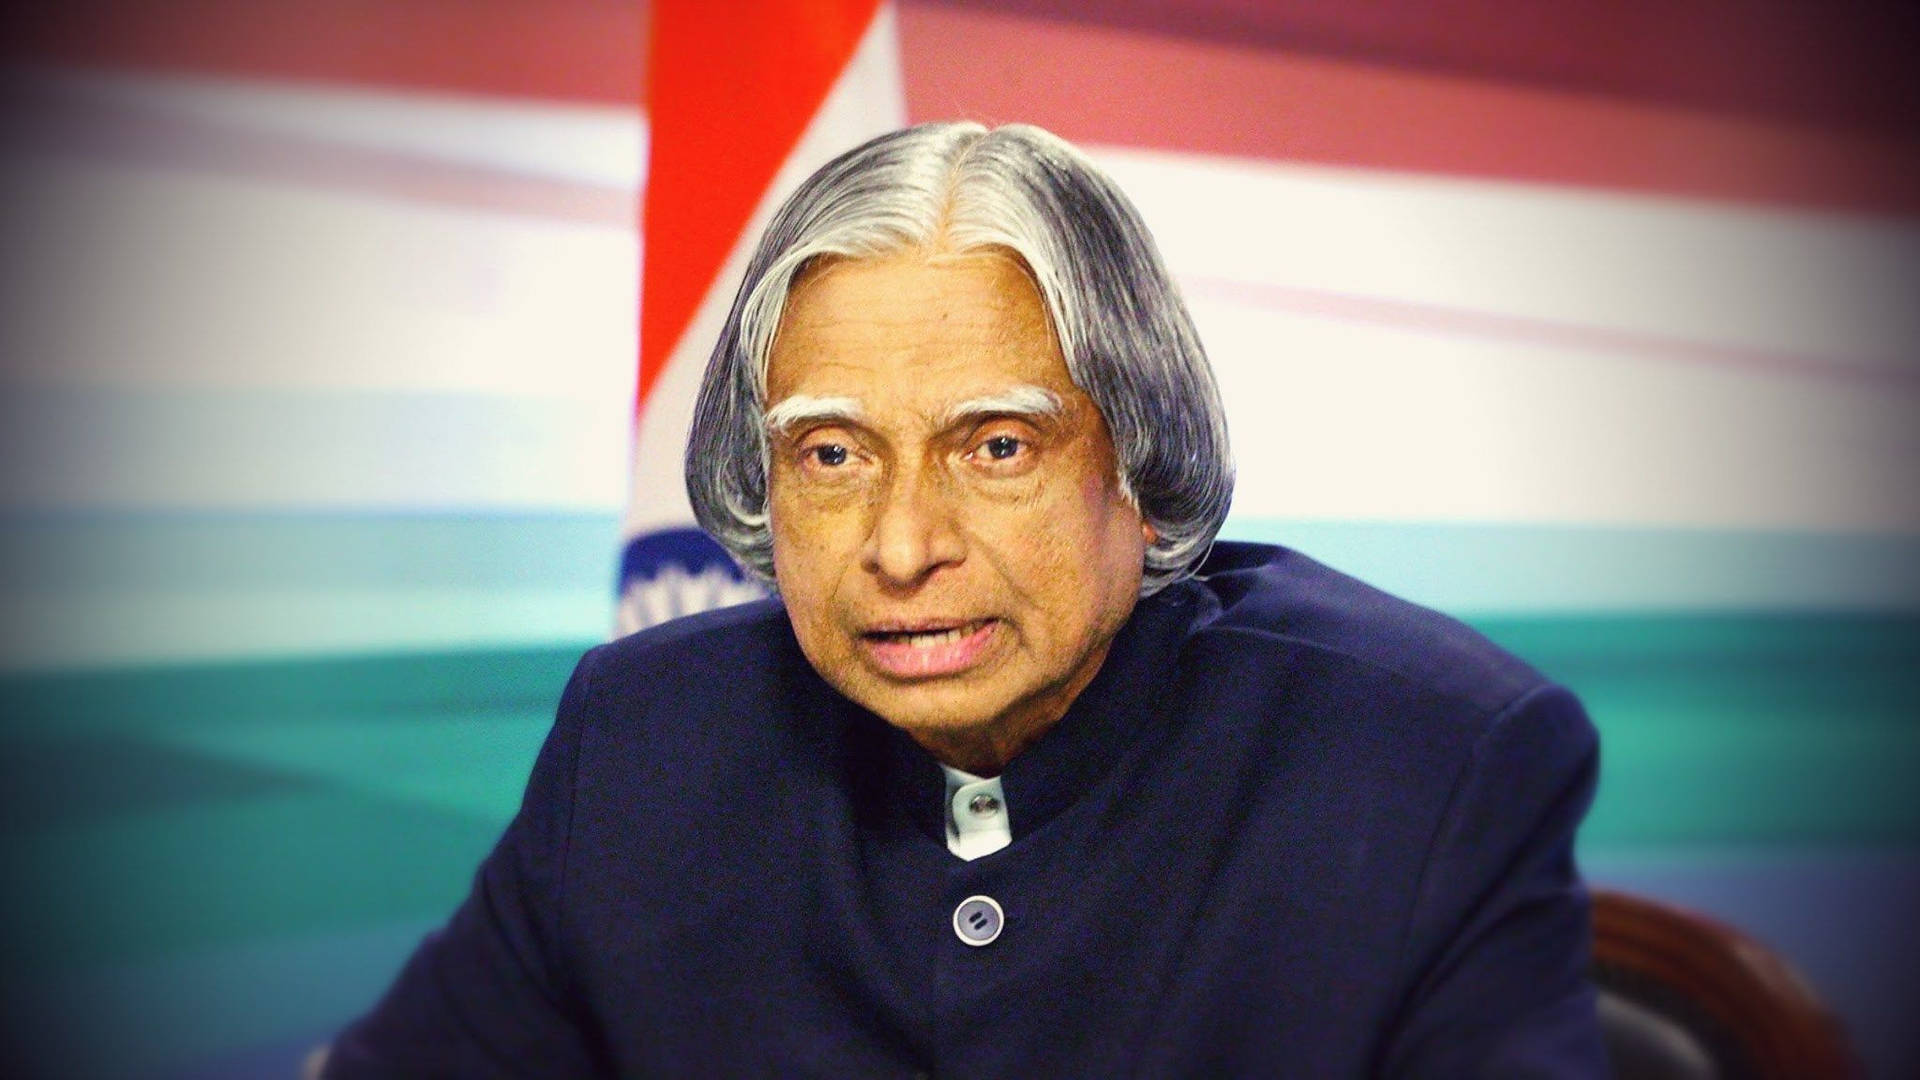 Honorable 11th President Of India, Dr. A.p.j Abdul Kalam In High Definition